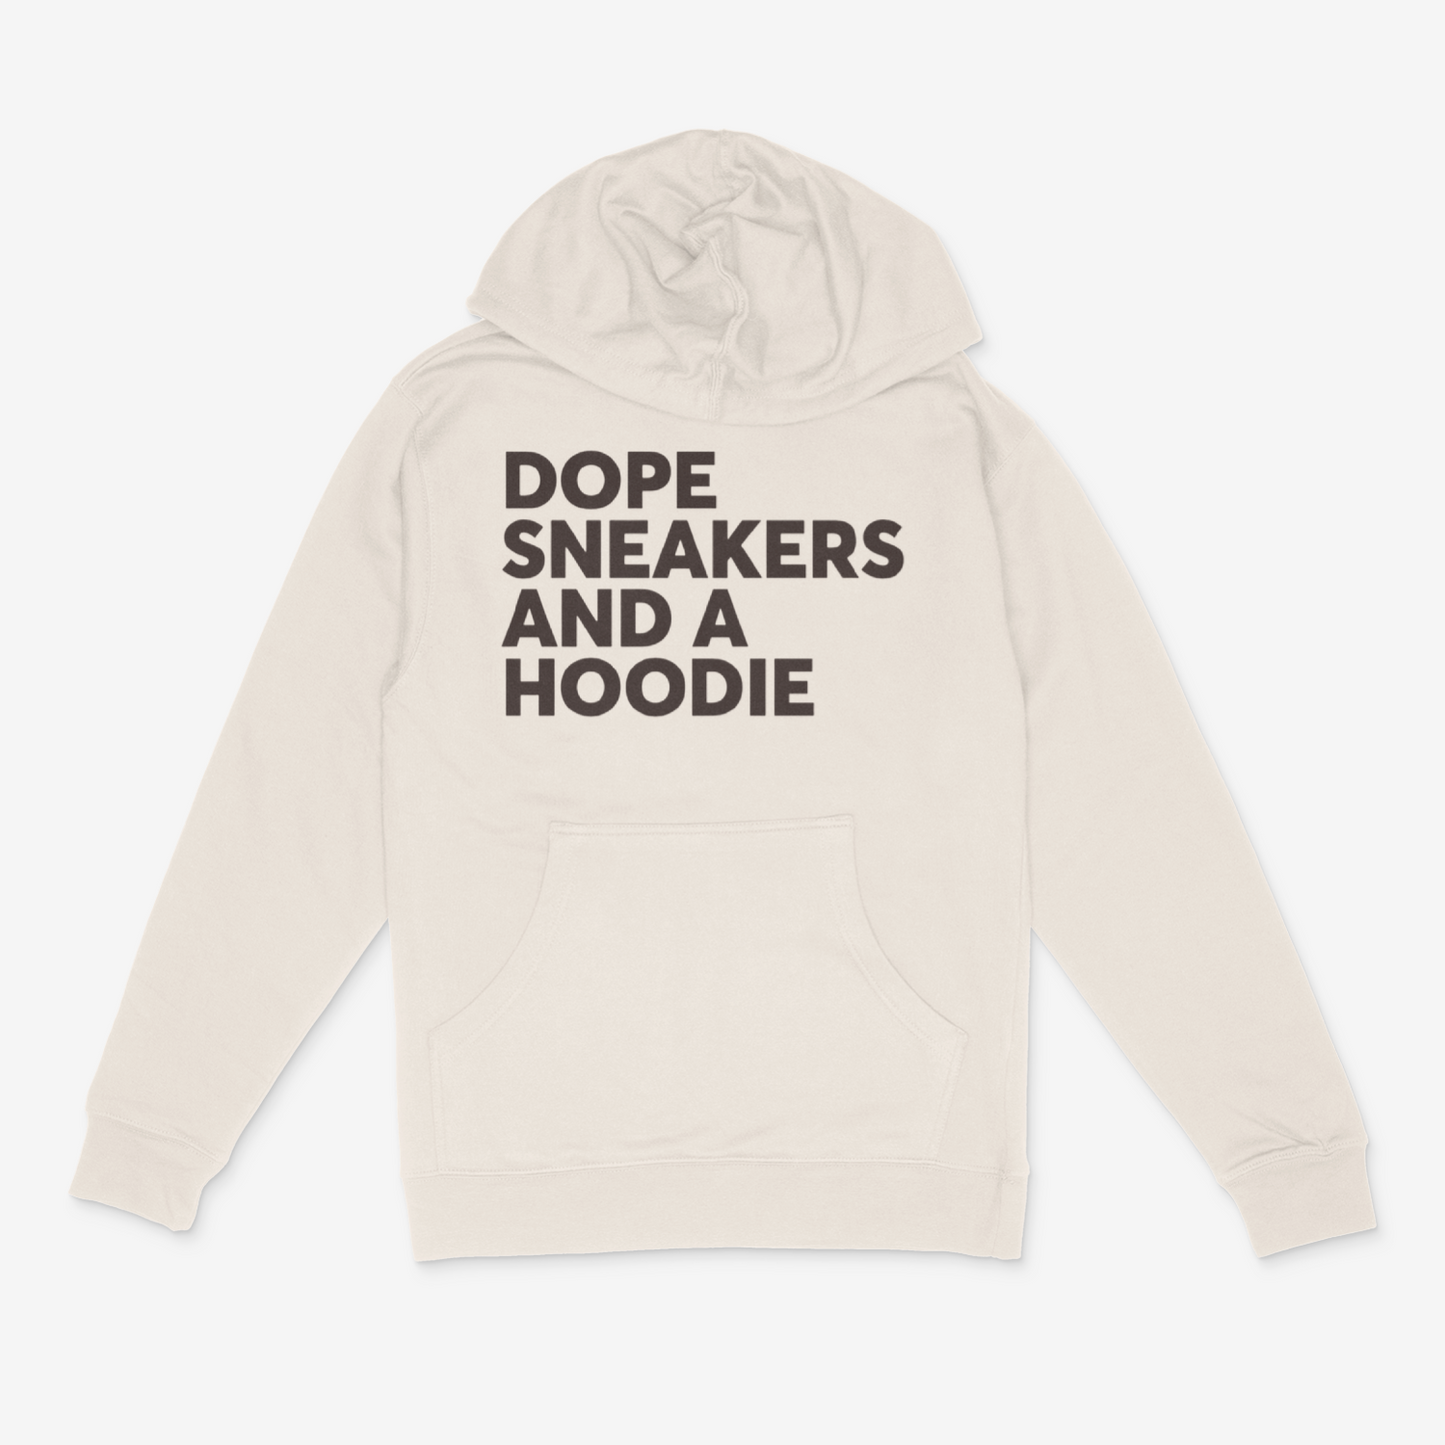 Dope Sneakers and A Hoodie (Chocolate Brown)